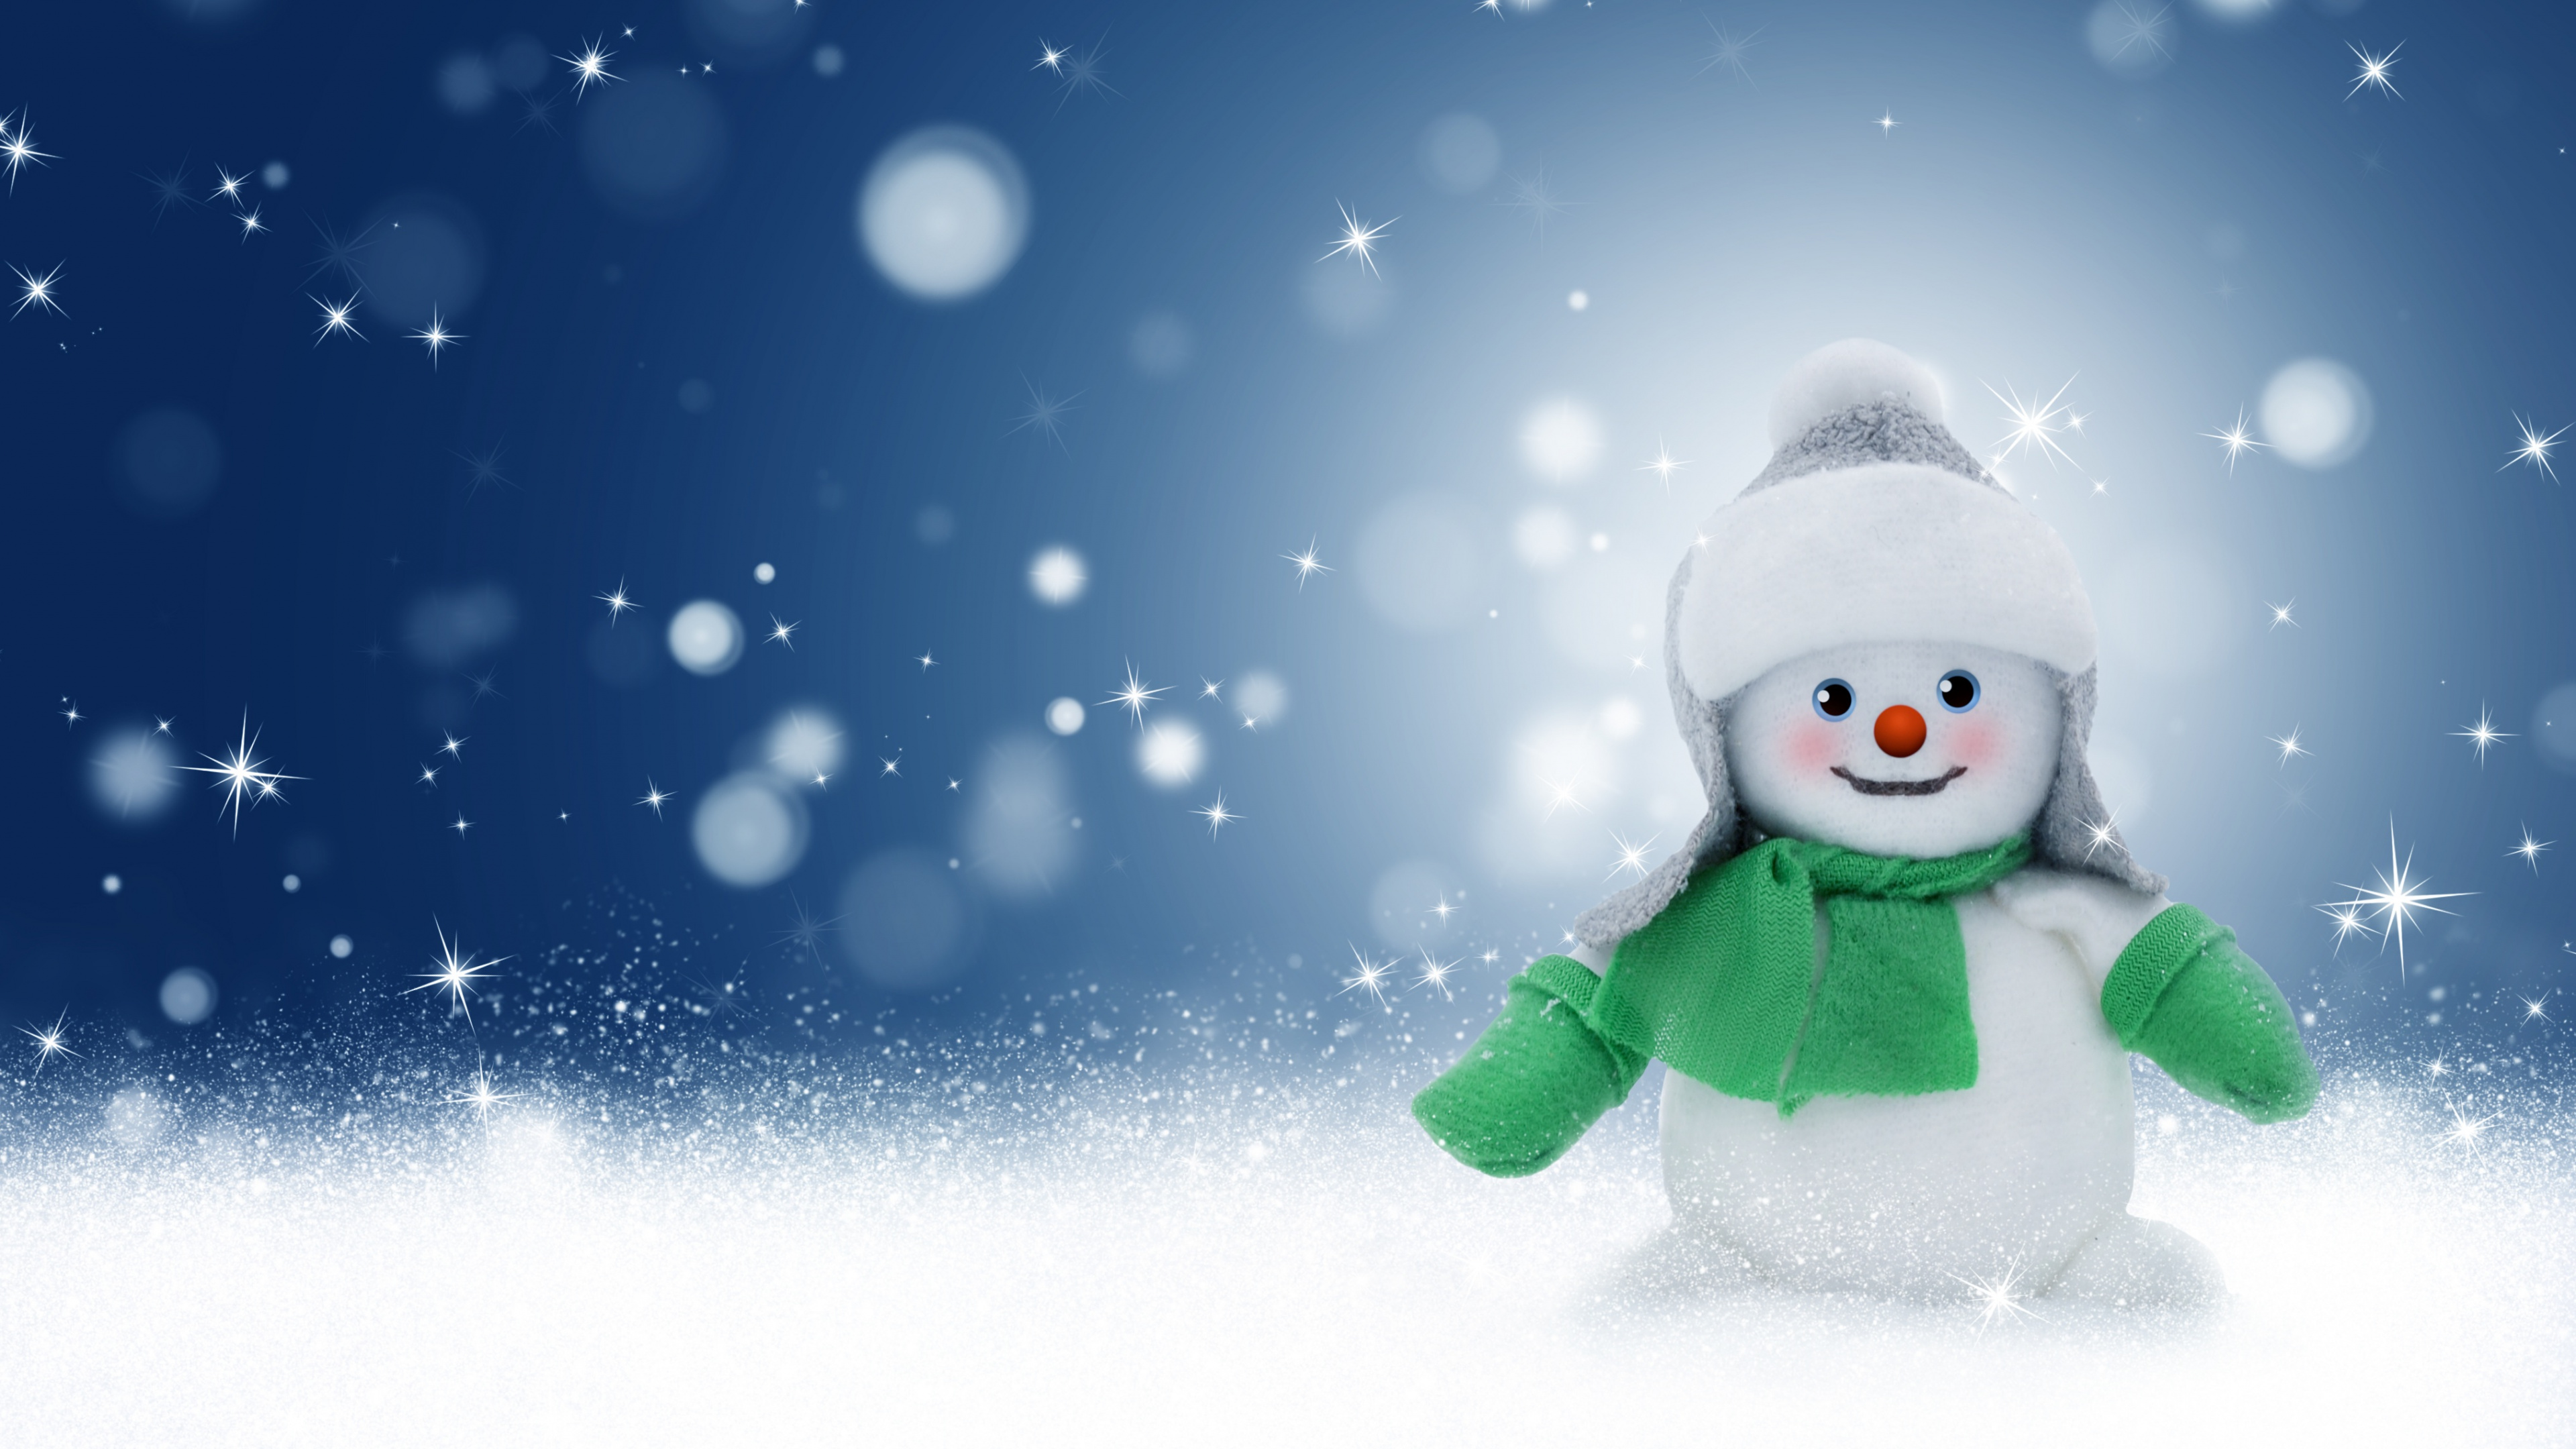 Christmas Day, Snow, Winter, Snowman, Playing in The Snow. Wallpaper in 3840x2160 Resolution